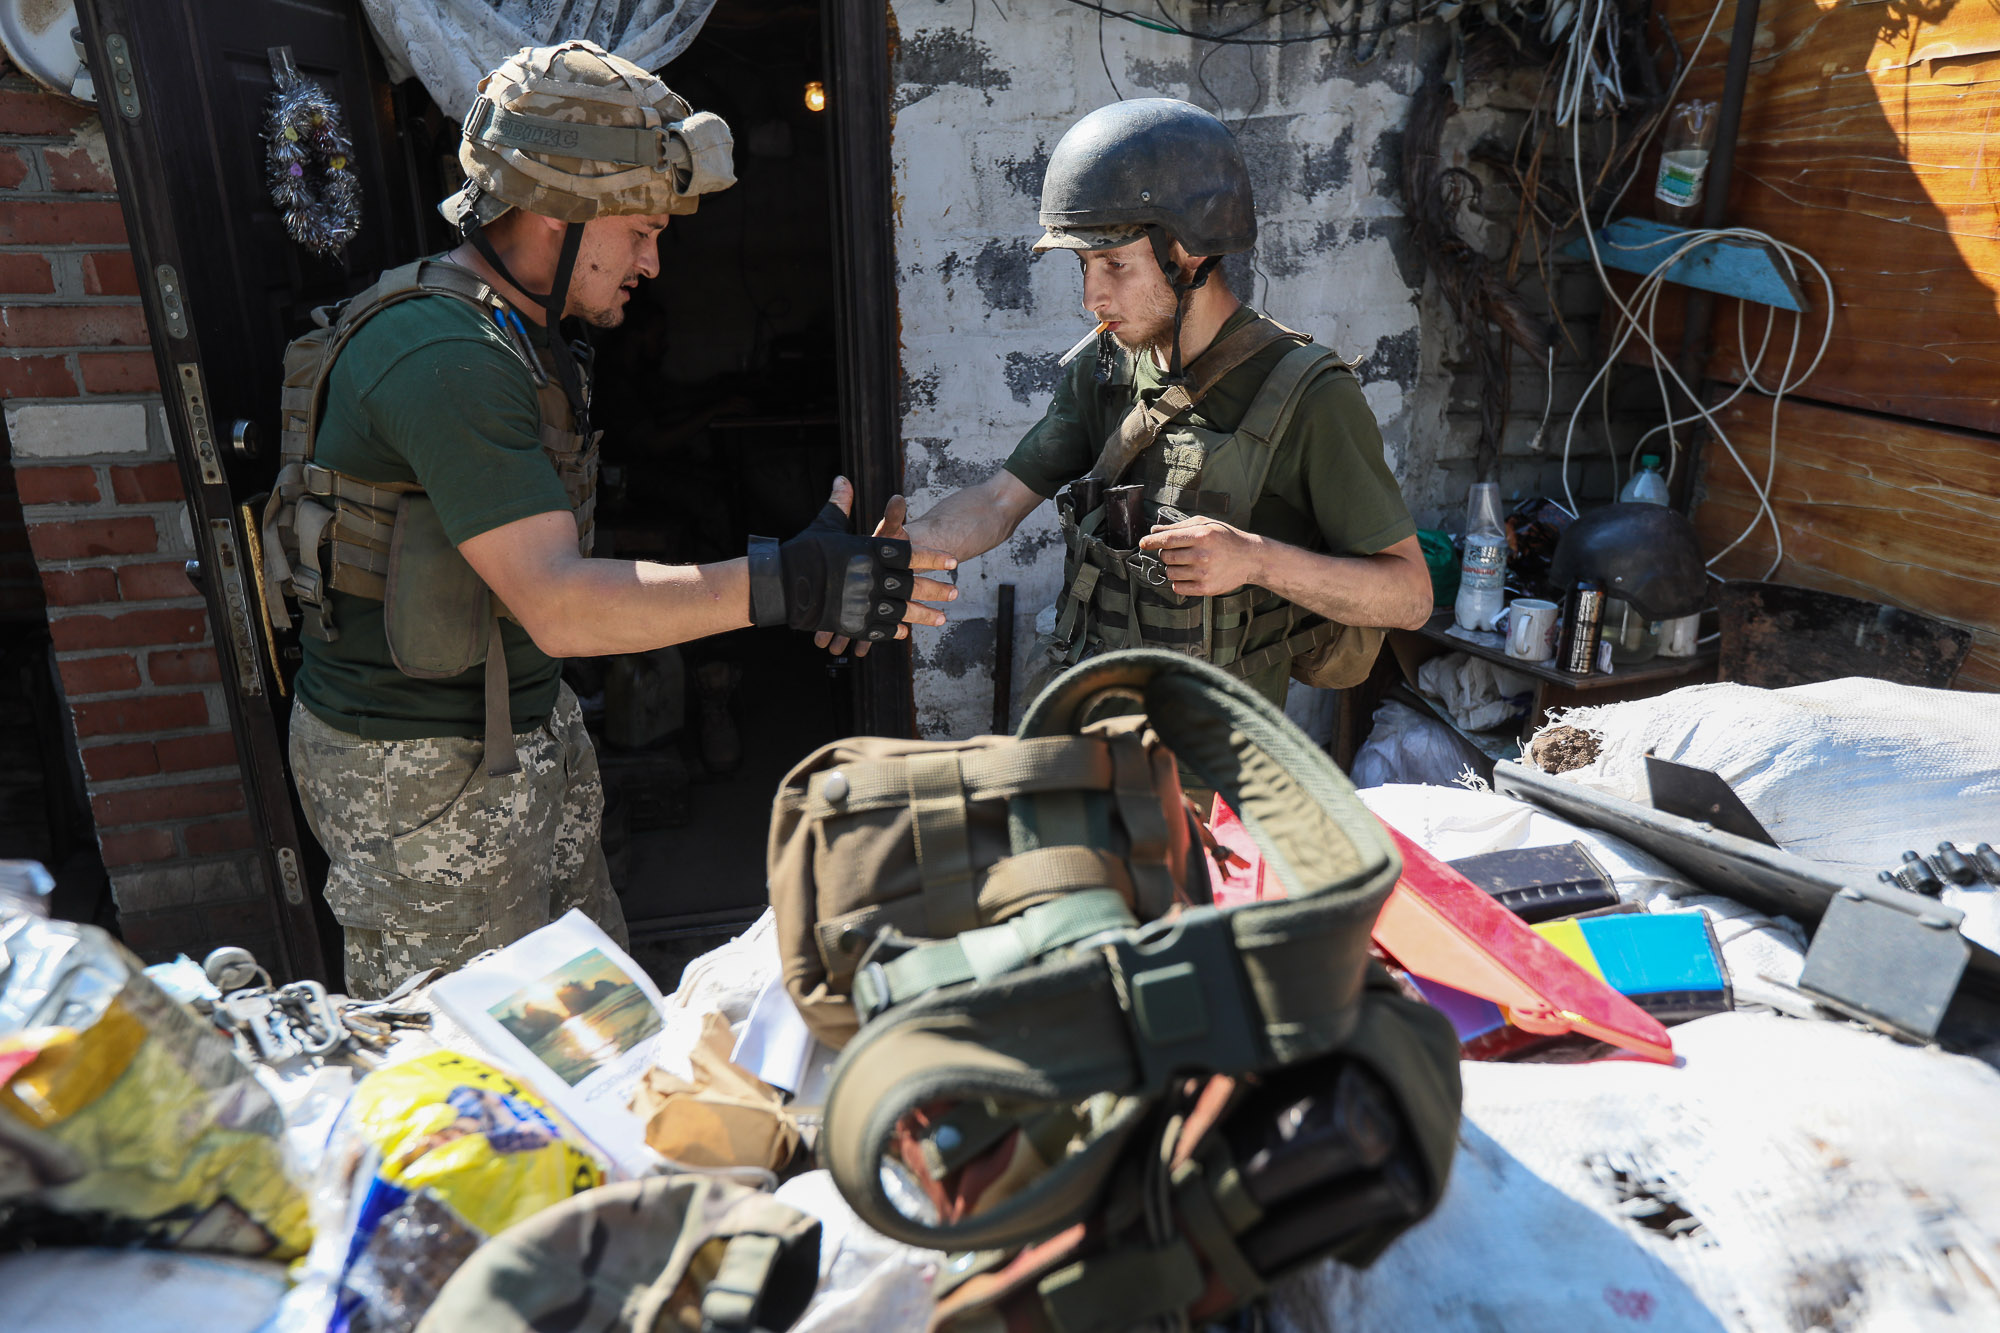 Ukrainian soldiers shake hands as they greet each other at a combat post in the town of Zaitseve on June 25